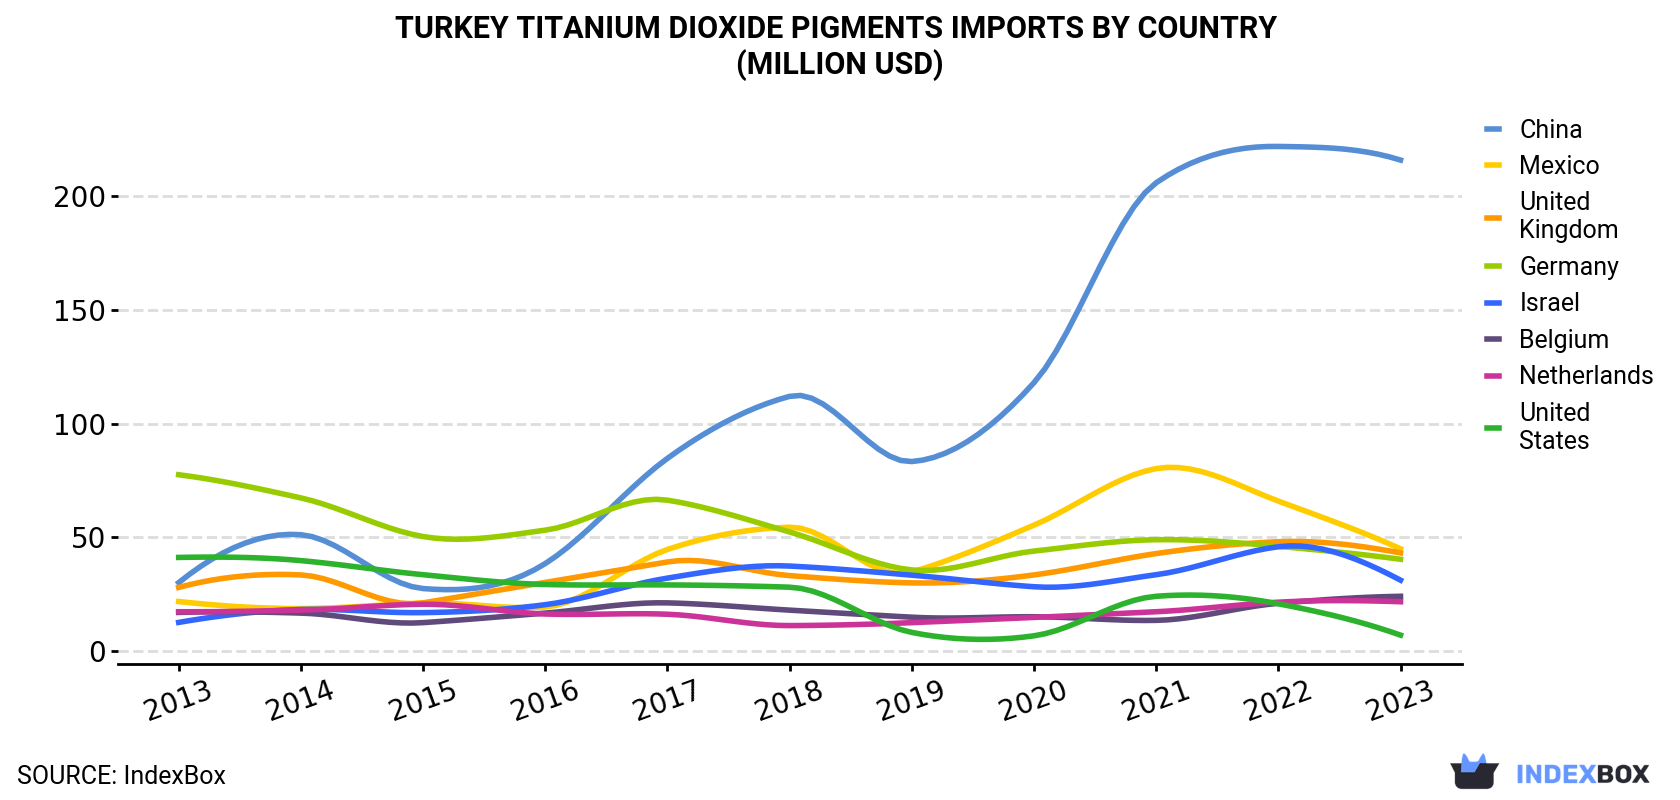 Turkey Titanium Dioxide Pigments Imports By Country (Million USD)